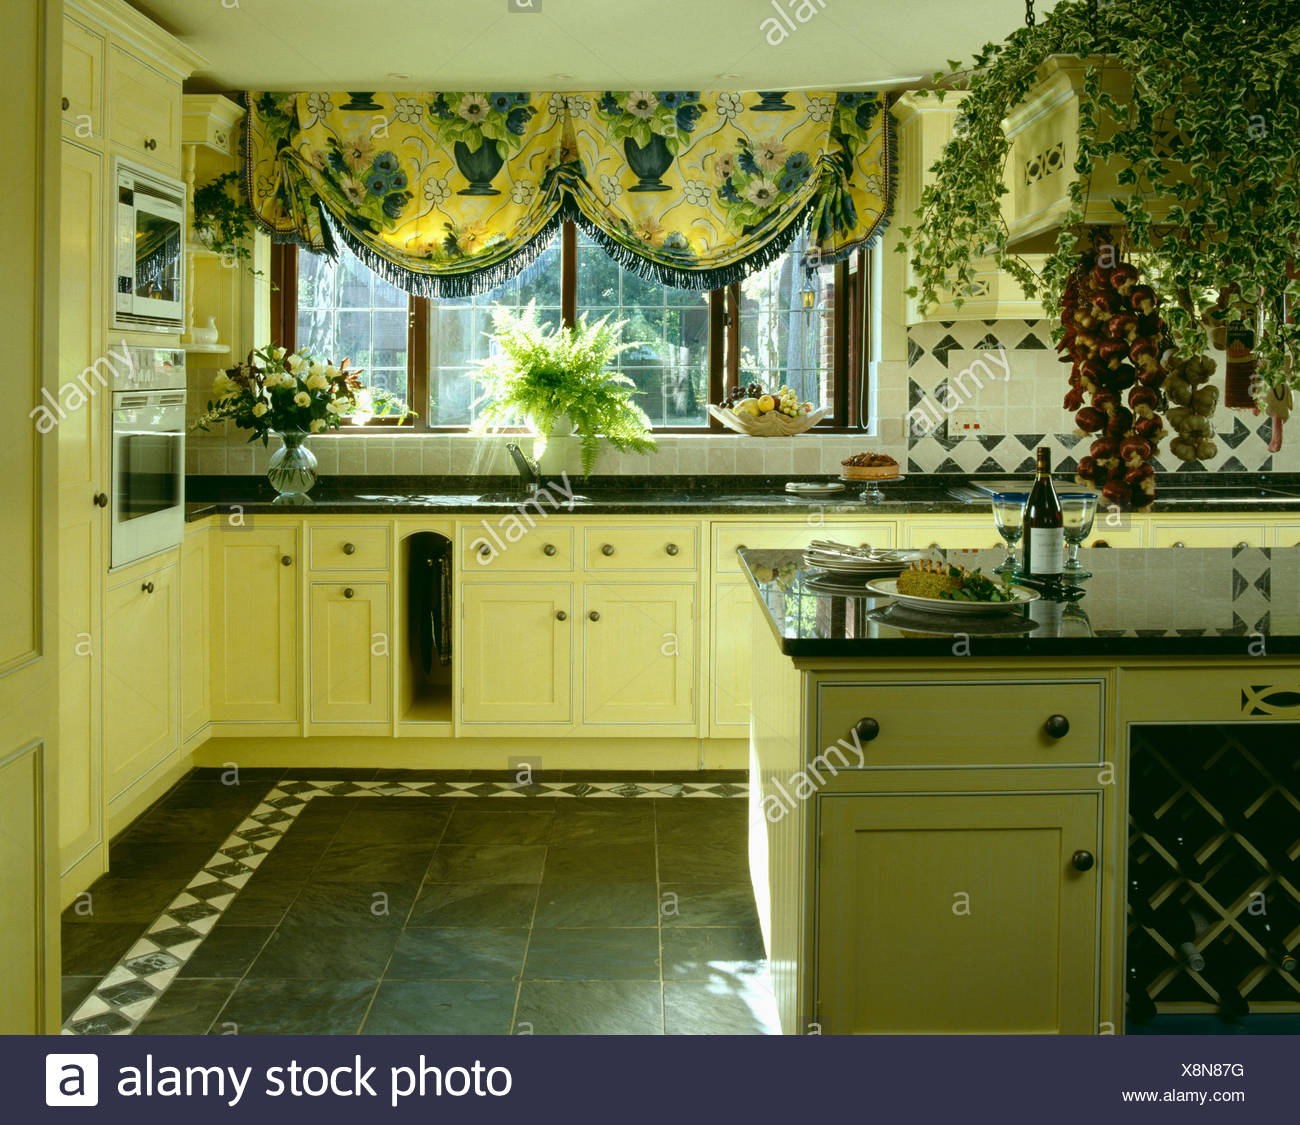 Yellow Fitted Eighties Kitchen With Yellow And Blue Patterned